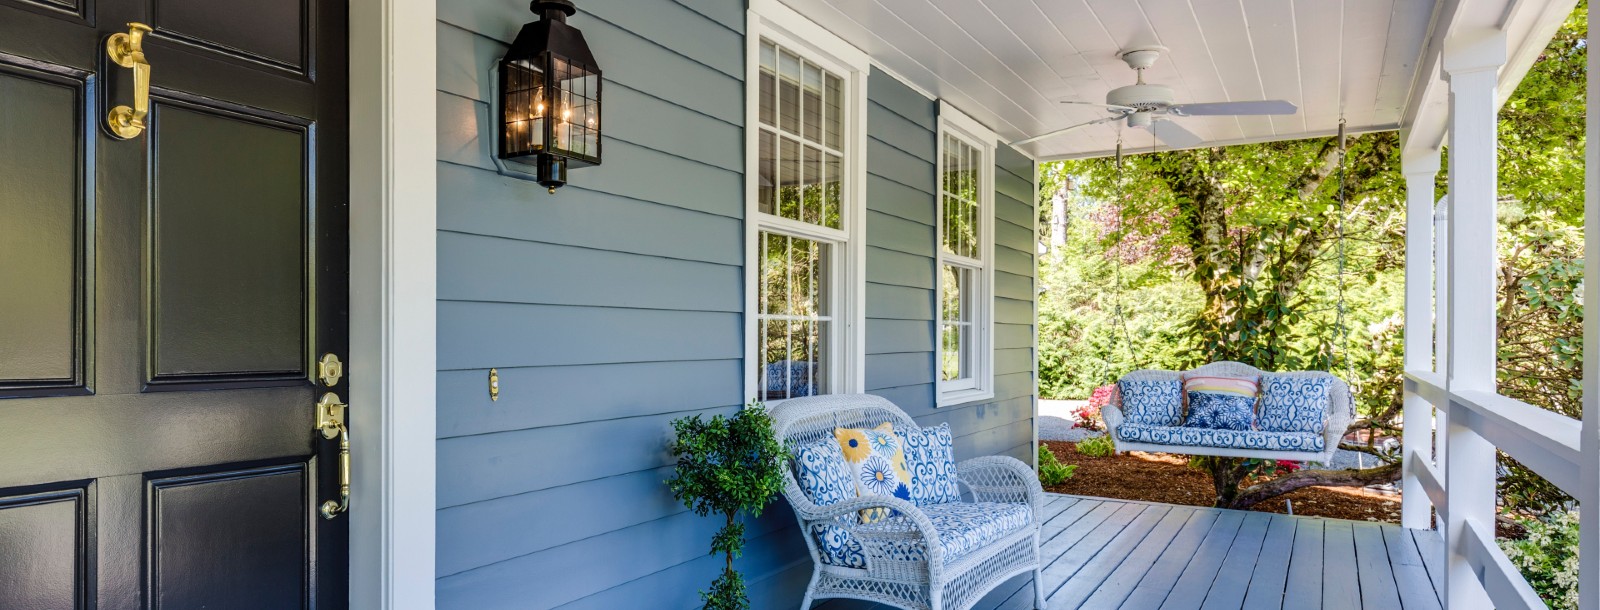 Front Porch with benches and porch swing